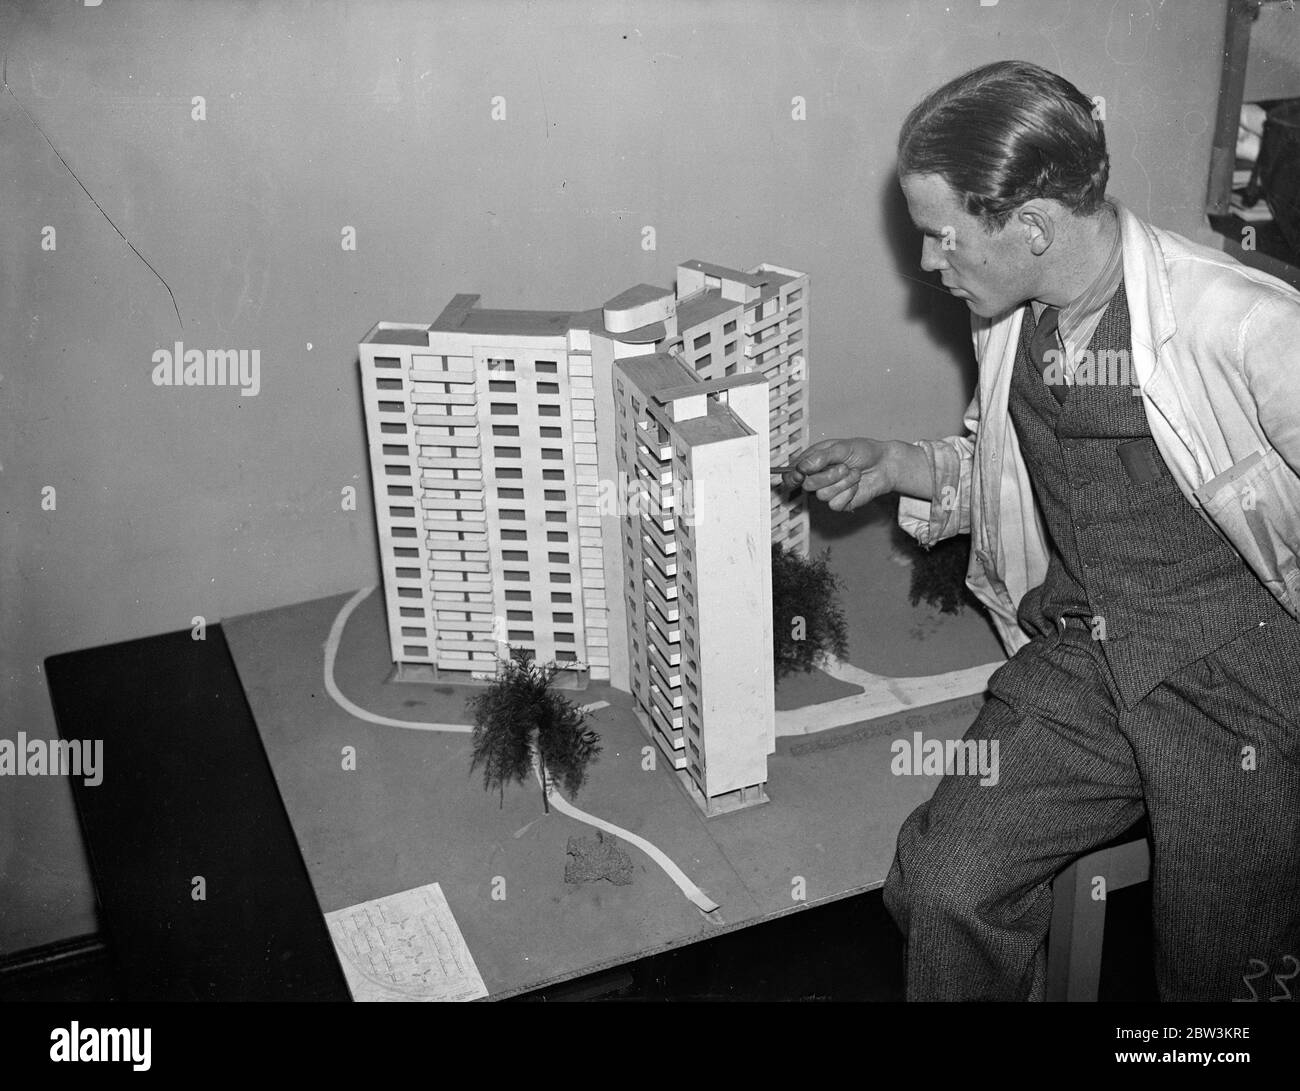 Fifteen storey tenements to be built . Fifteen storey buildings proposed to replace slums in centre of London . A model of the fifteen storey flats for slum clearance in St Pancras designed by four students of the Architectural Association School . Mr B A Le Mare , one of the students , is standing with the model . 5 January 1936 Stock Photo